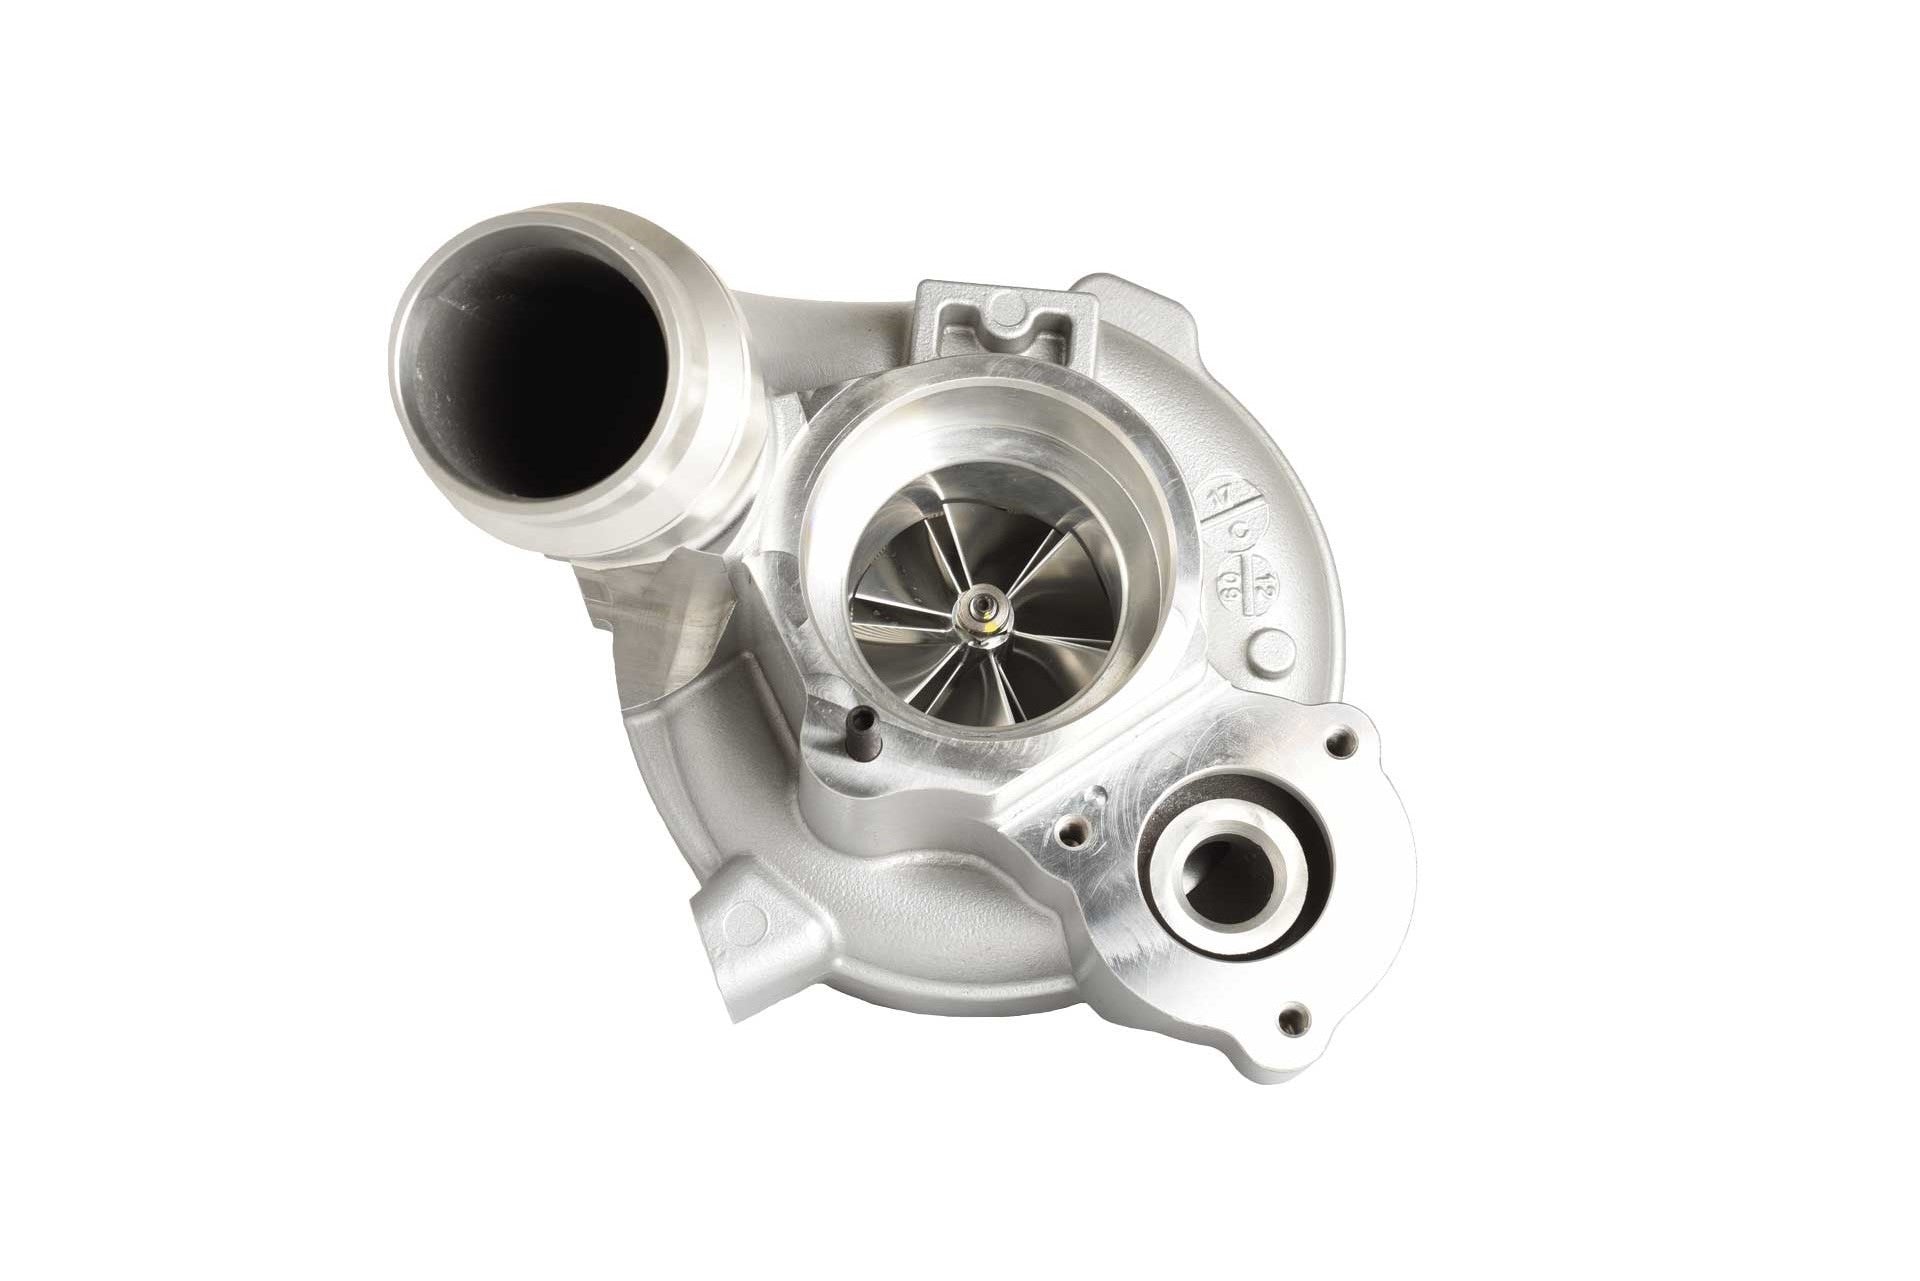 TR TW2001 Turbo for BMW N55 and Motul 300V Power & Competition